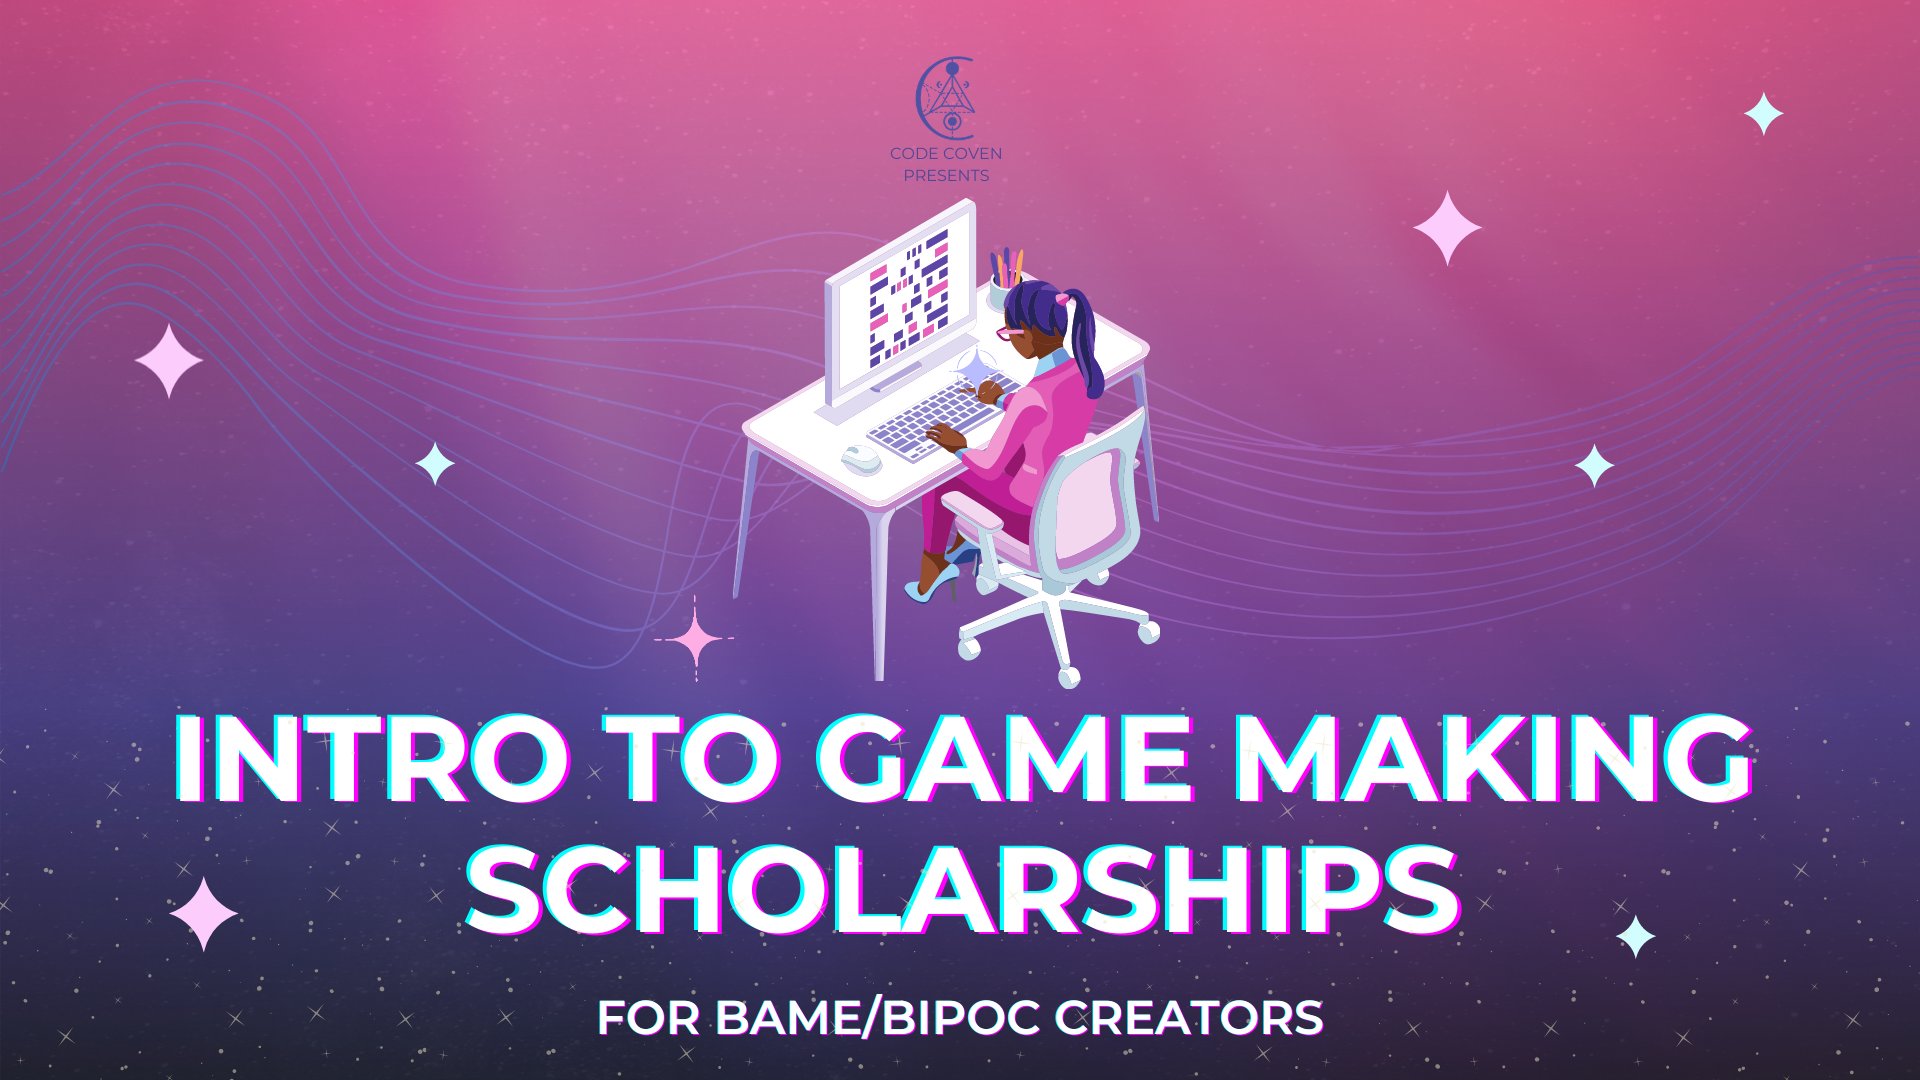 Their&nbsp;Intro To Game Making&nbsp;course comes with zero expectations of prior knowledge or games literacy and they build their curriculum to adapt to the interests and needs of each cohort.